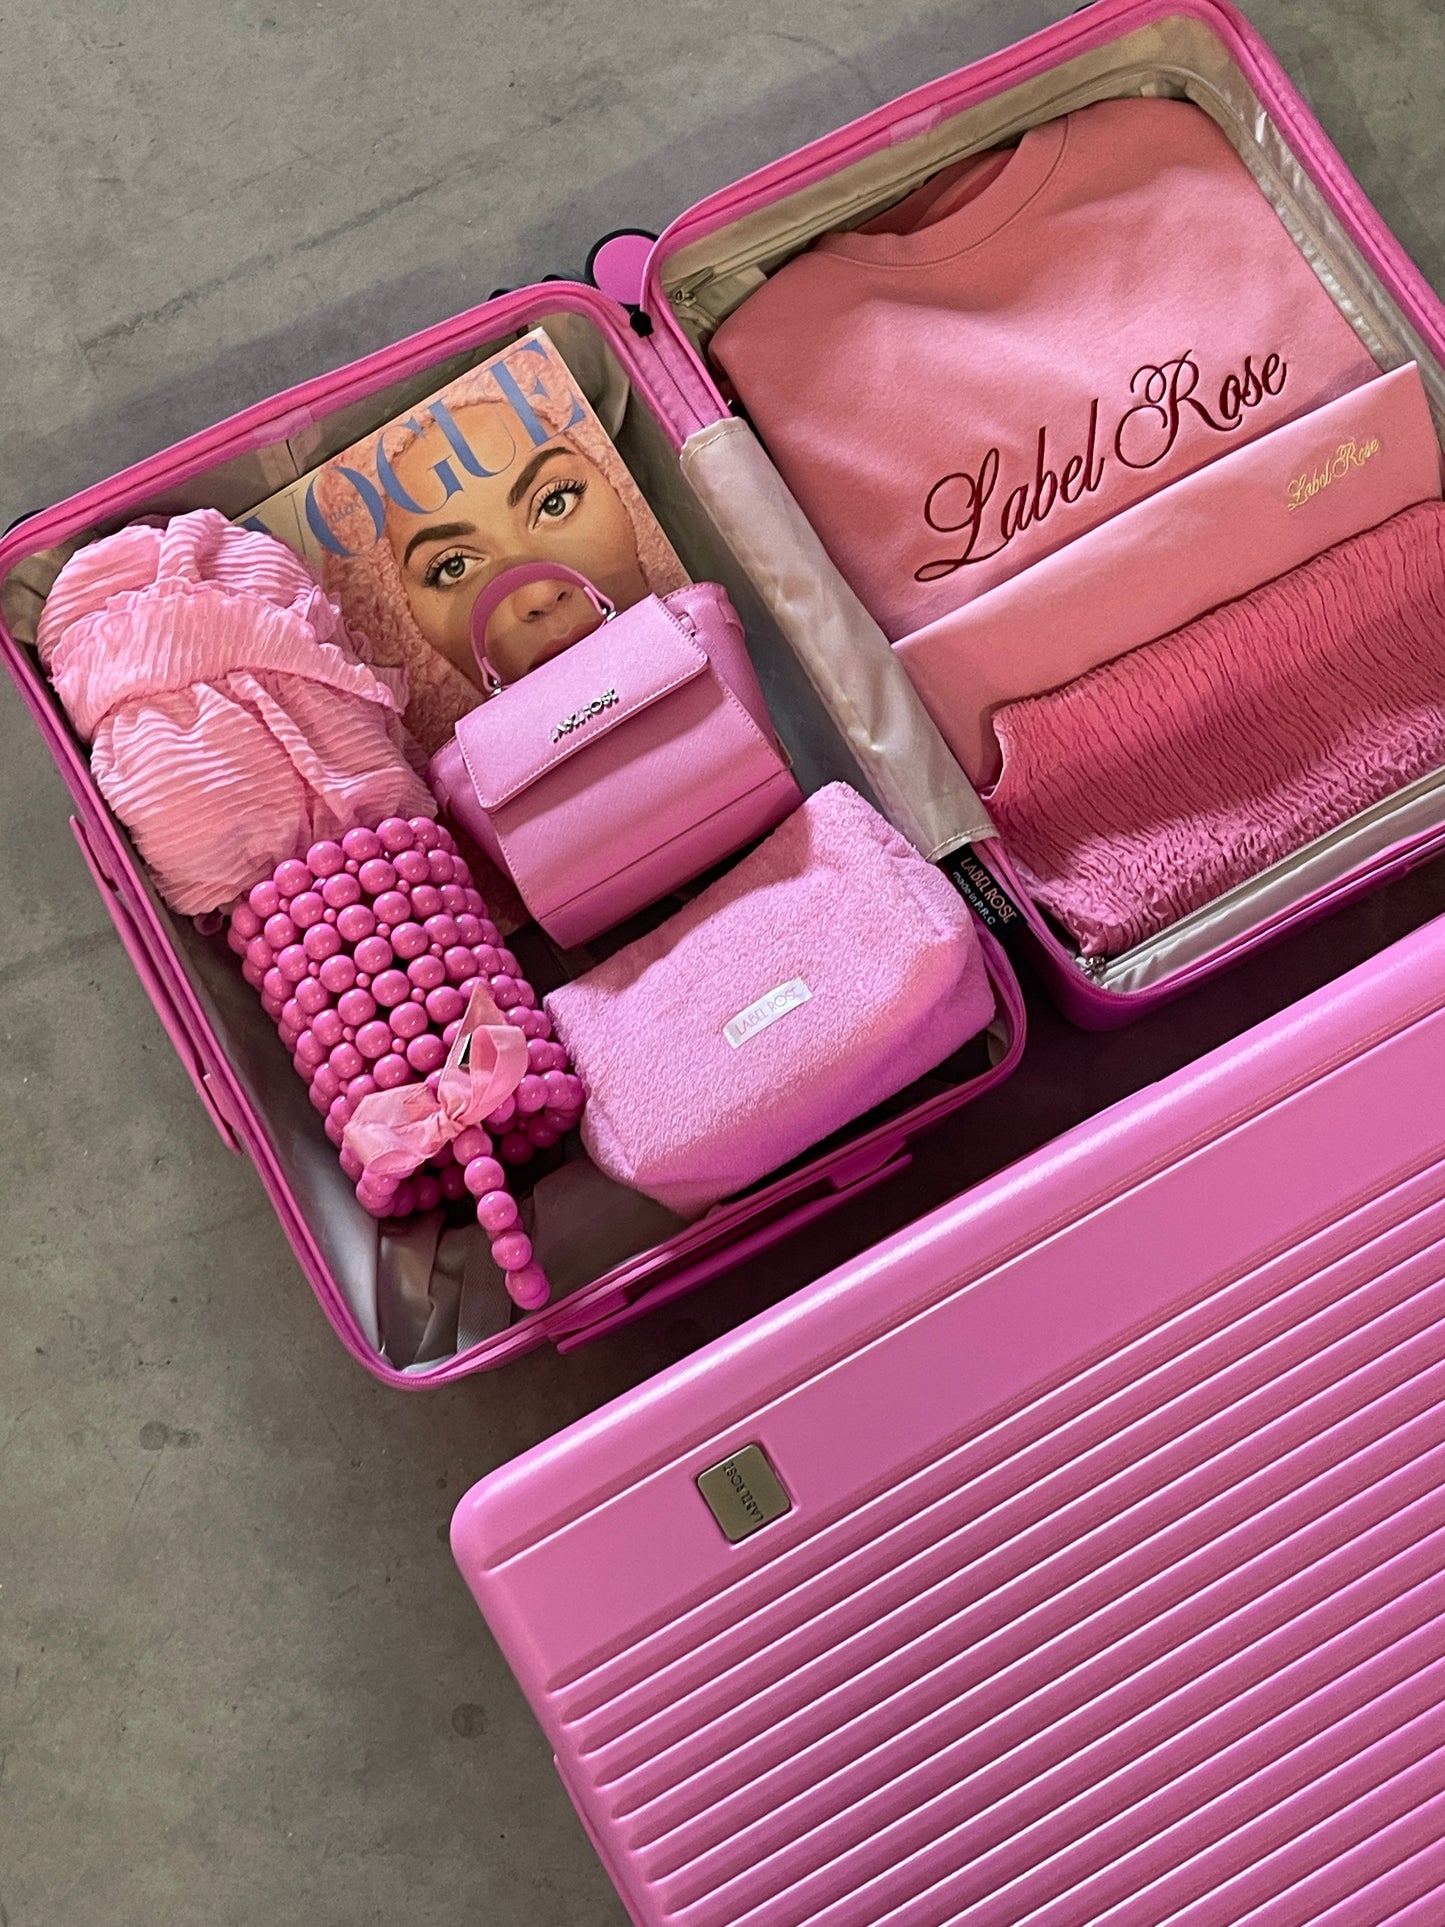 Matte trolley suitcase four wheels - PINK